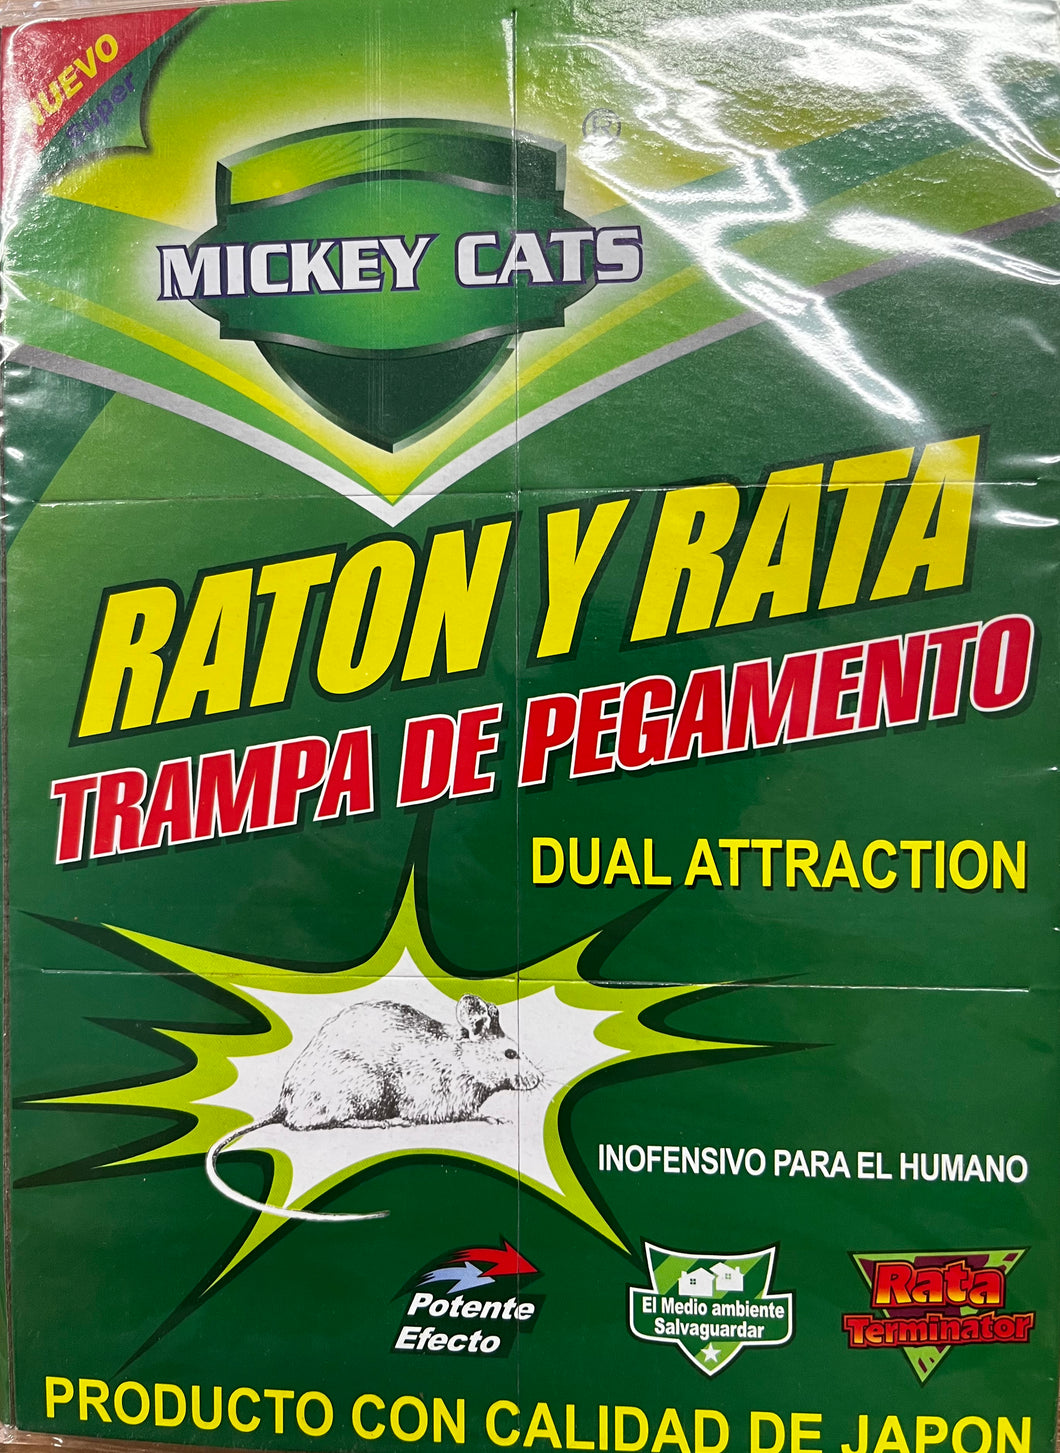 Mickey Cats Mouse and Rat Sticky Trap